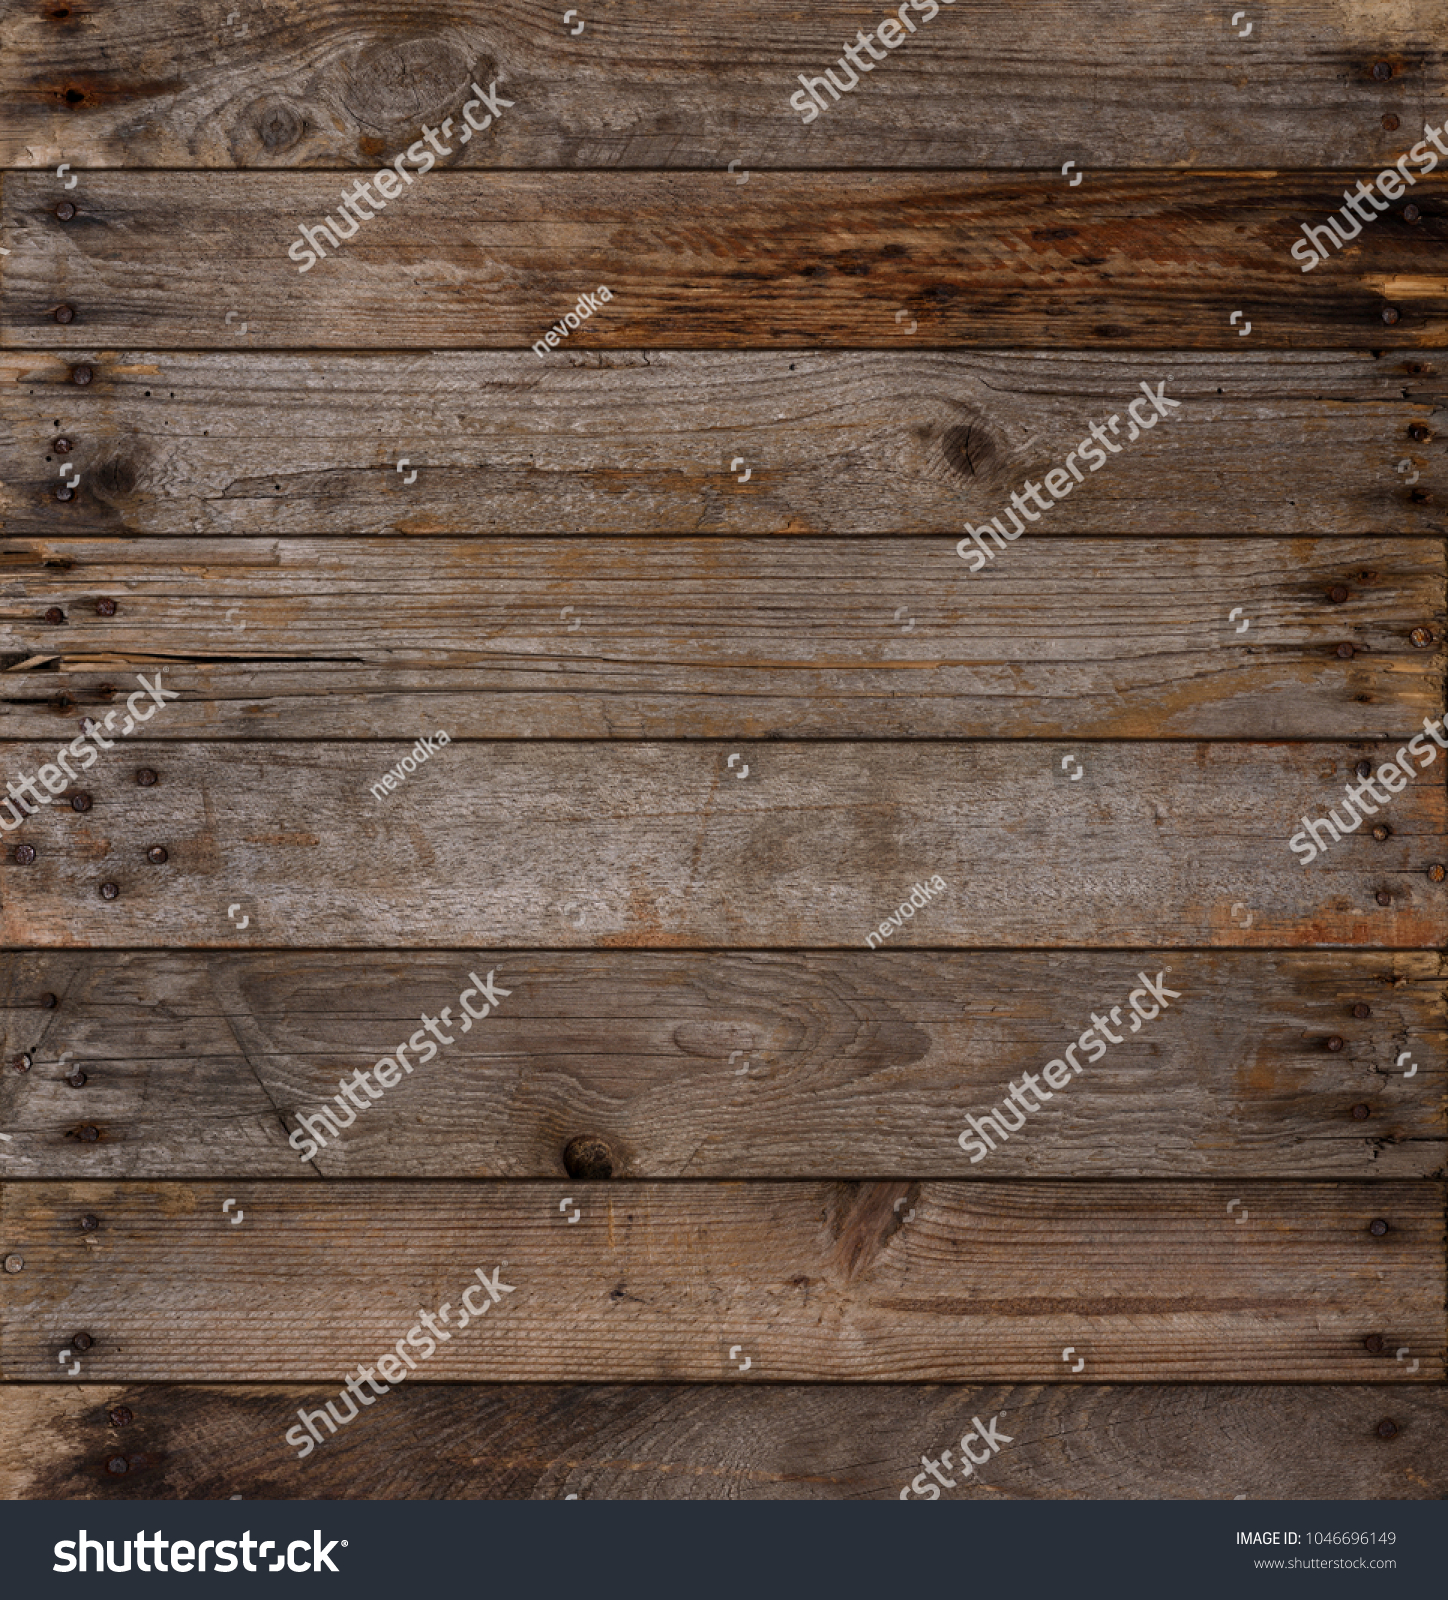 Wooden planks texture background, weathered, with rusty nails, top view, sharp and highly detailed. #1046696149